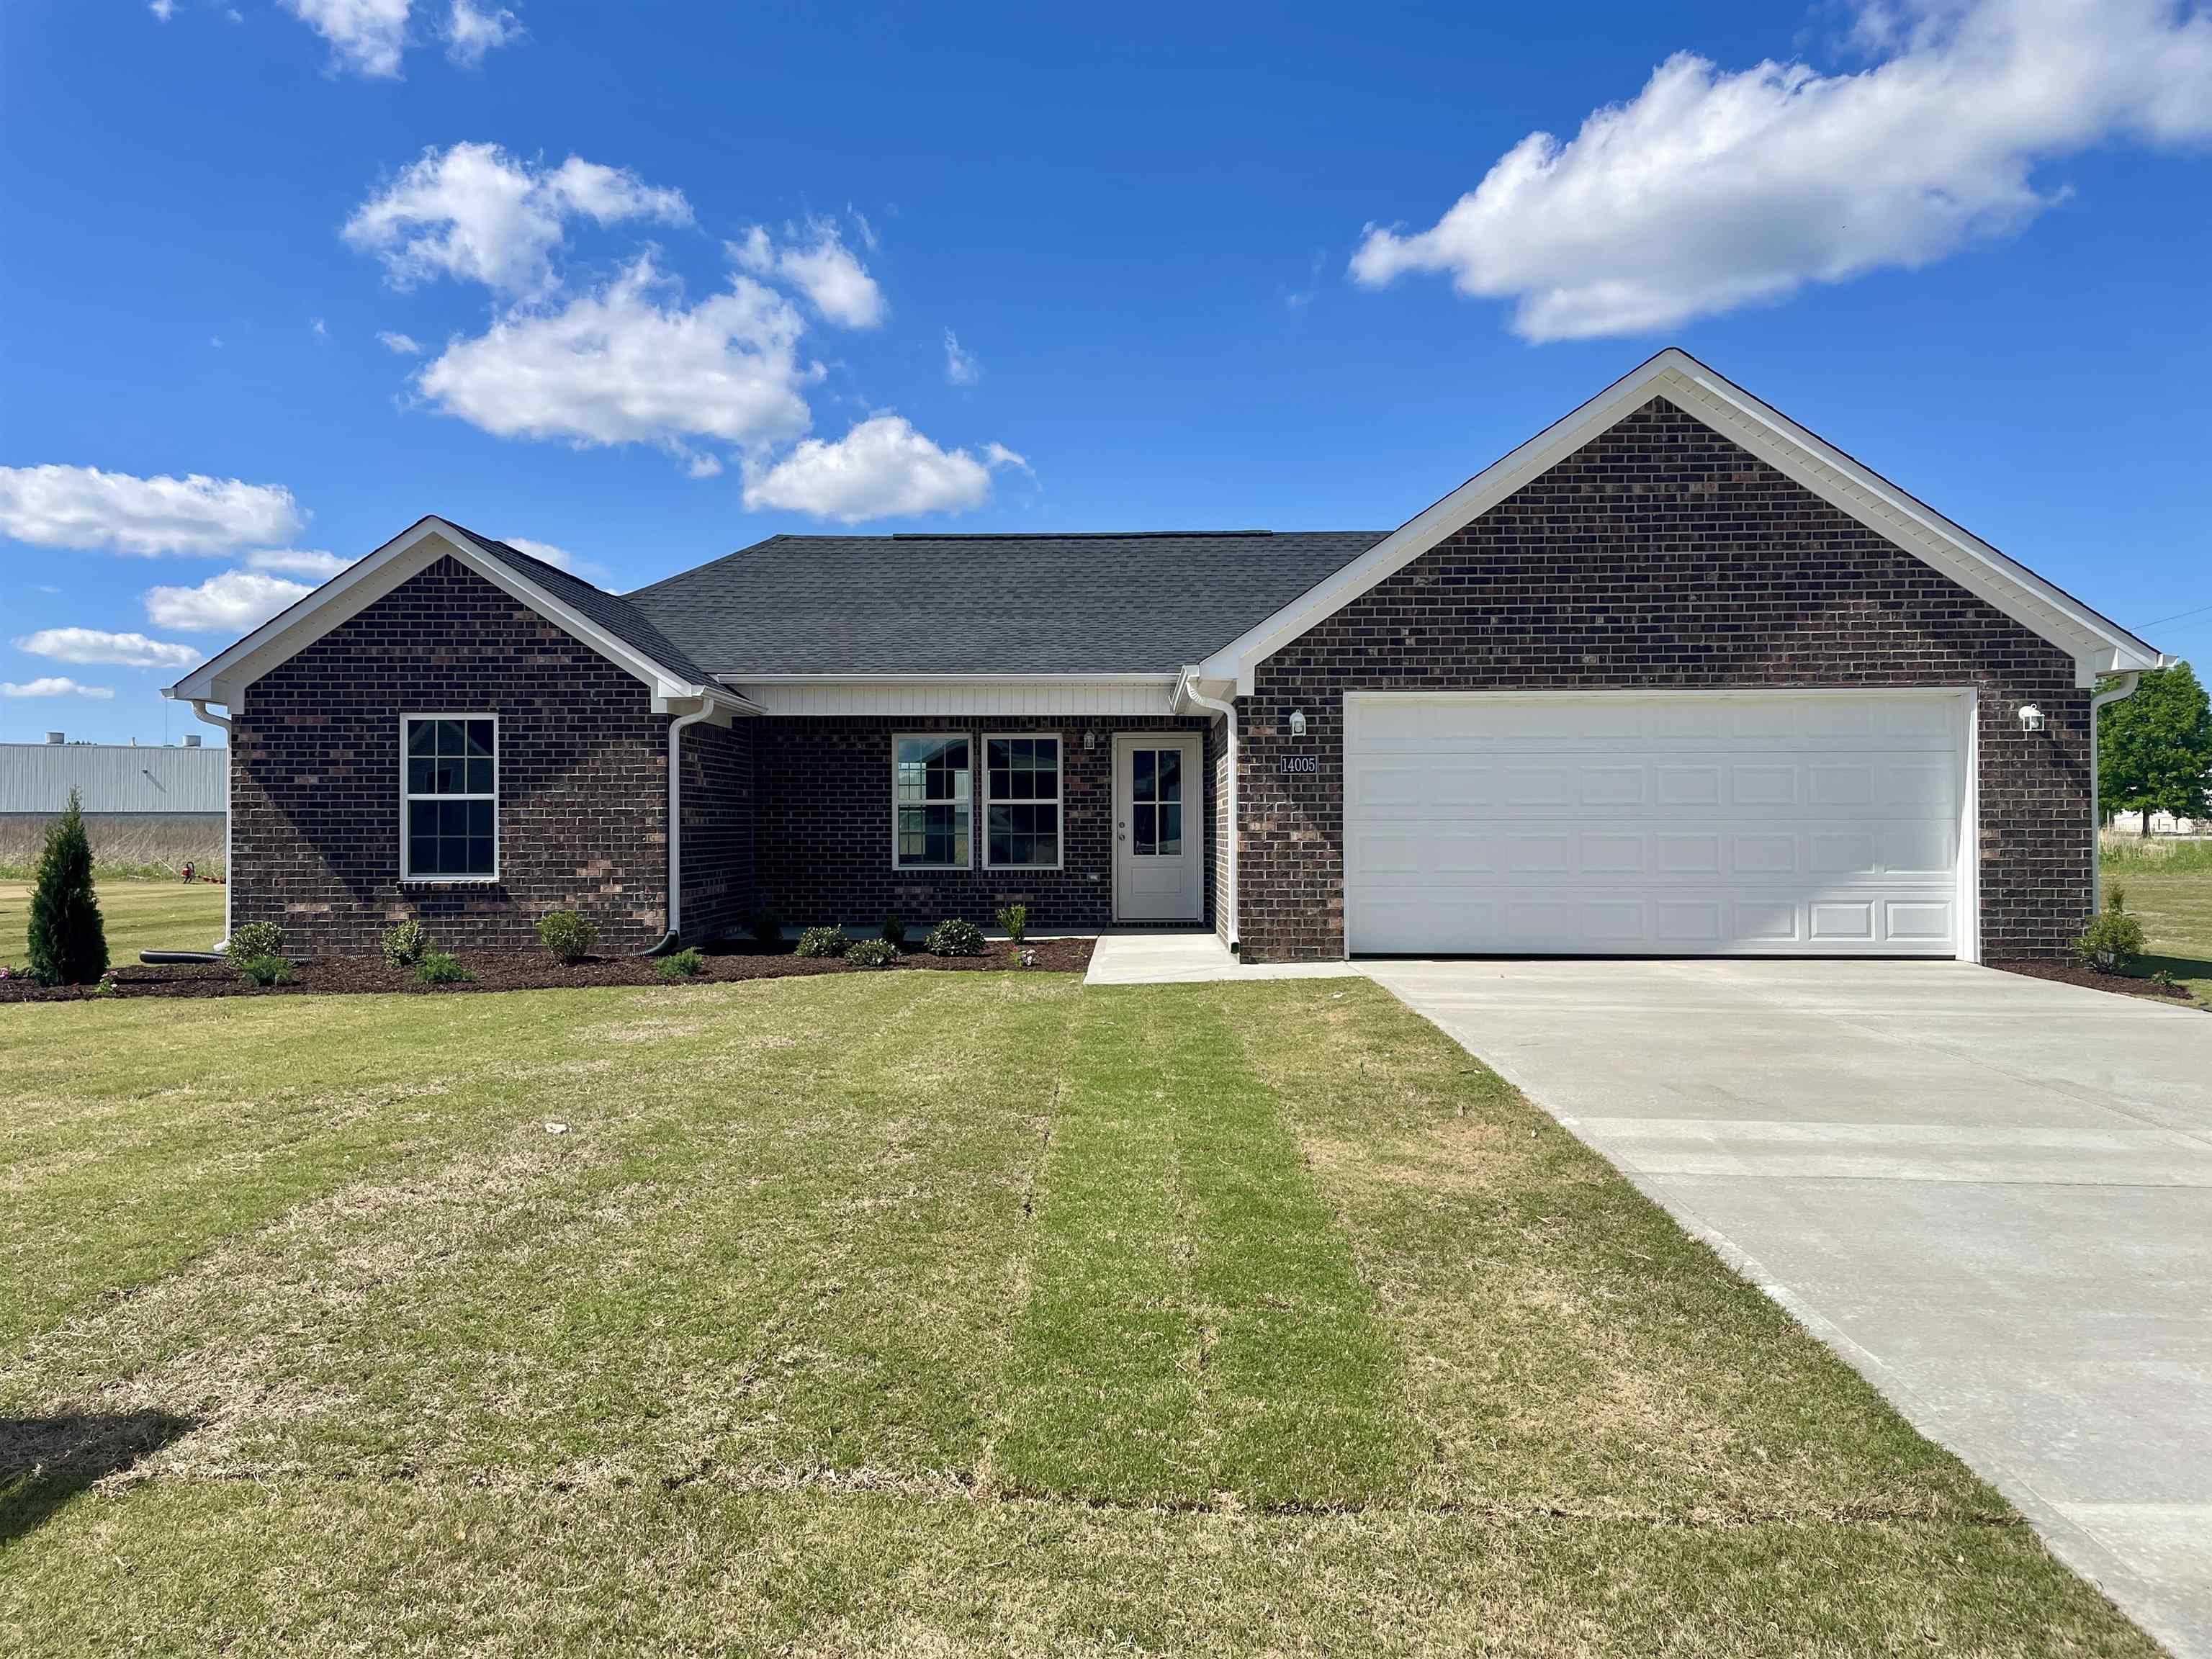 14005 Westhaven Cove, Milan, TN 